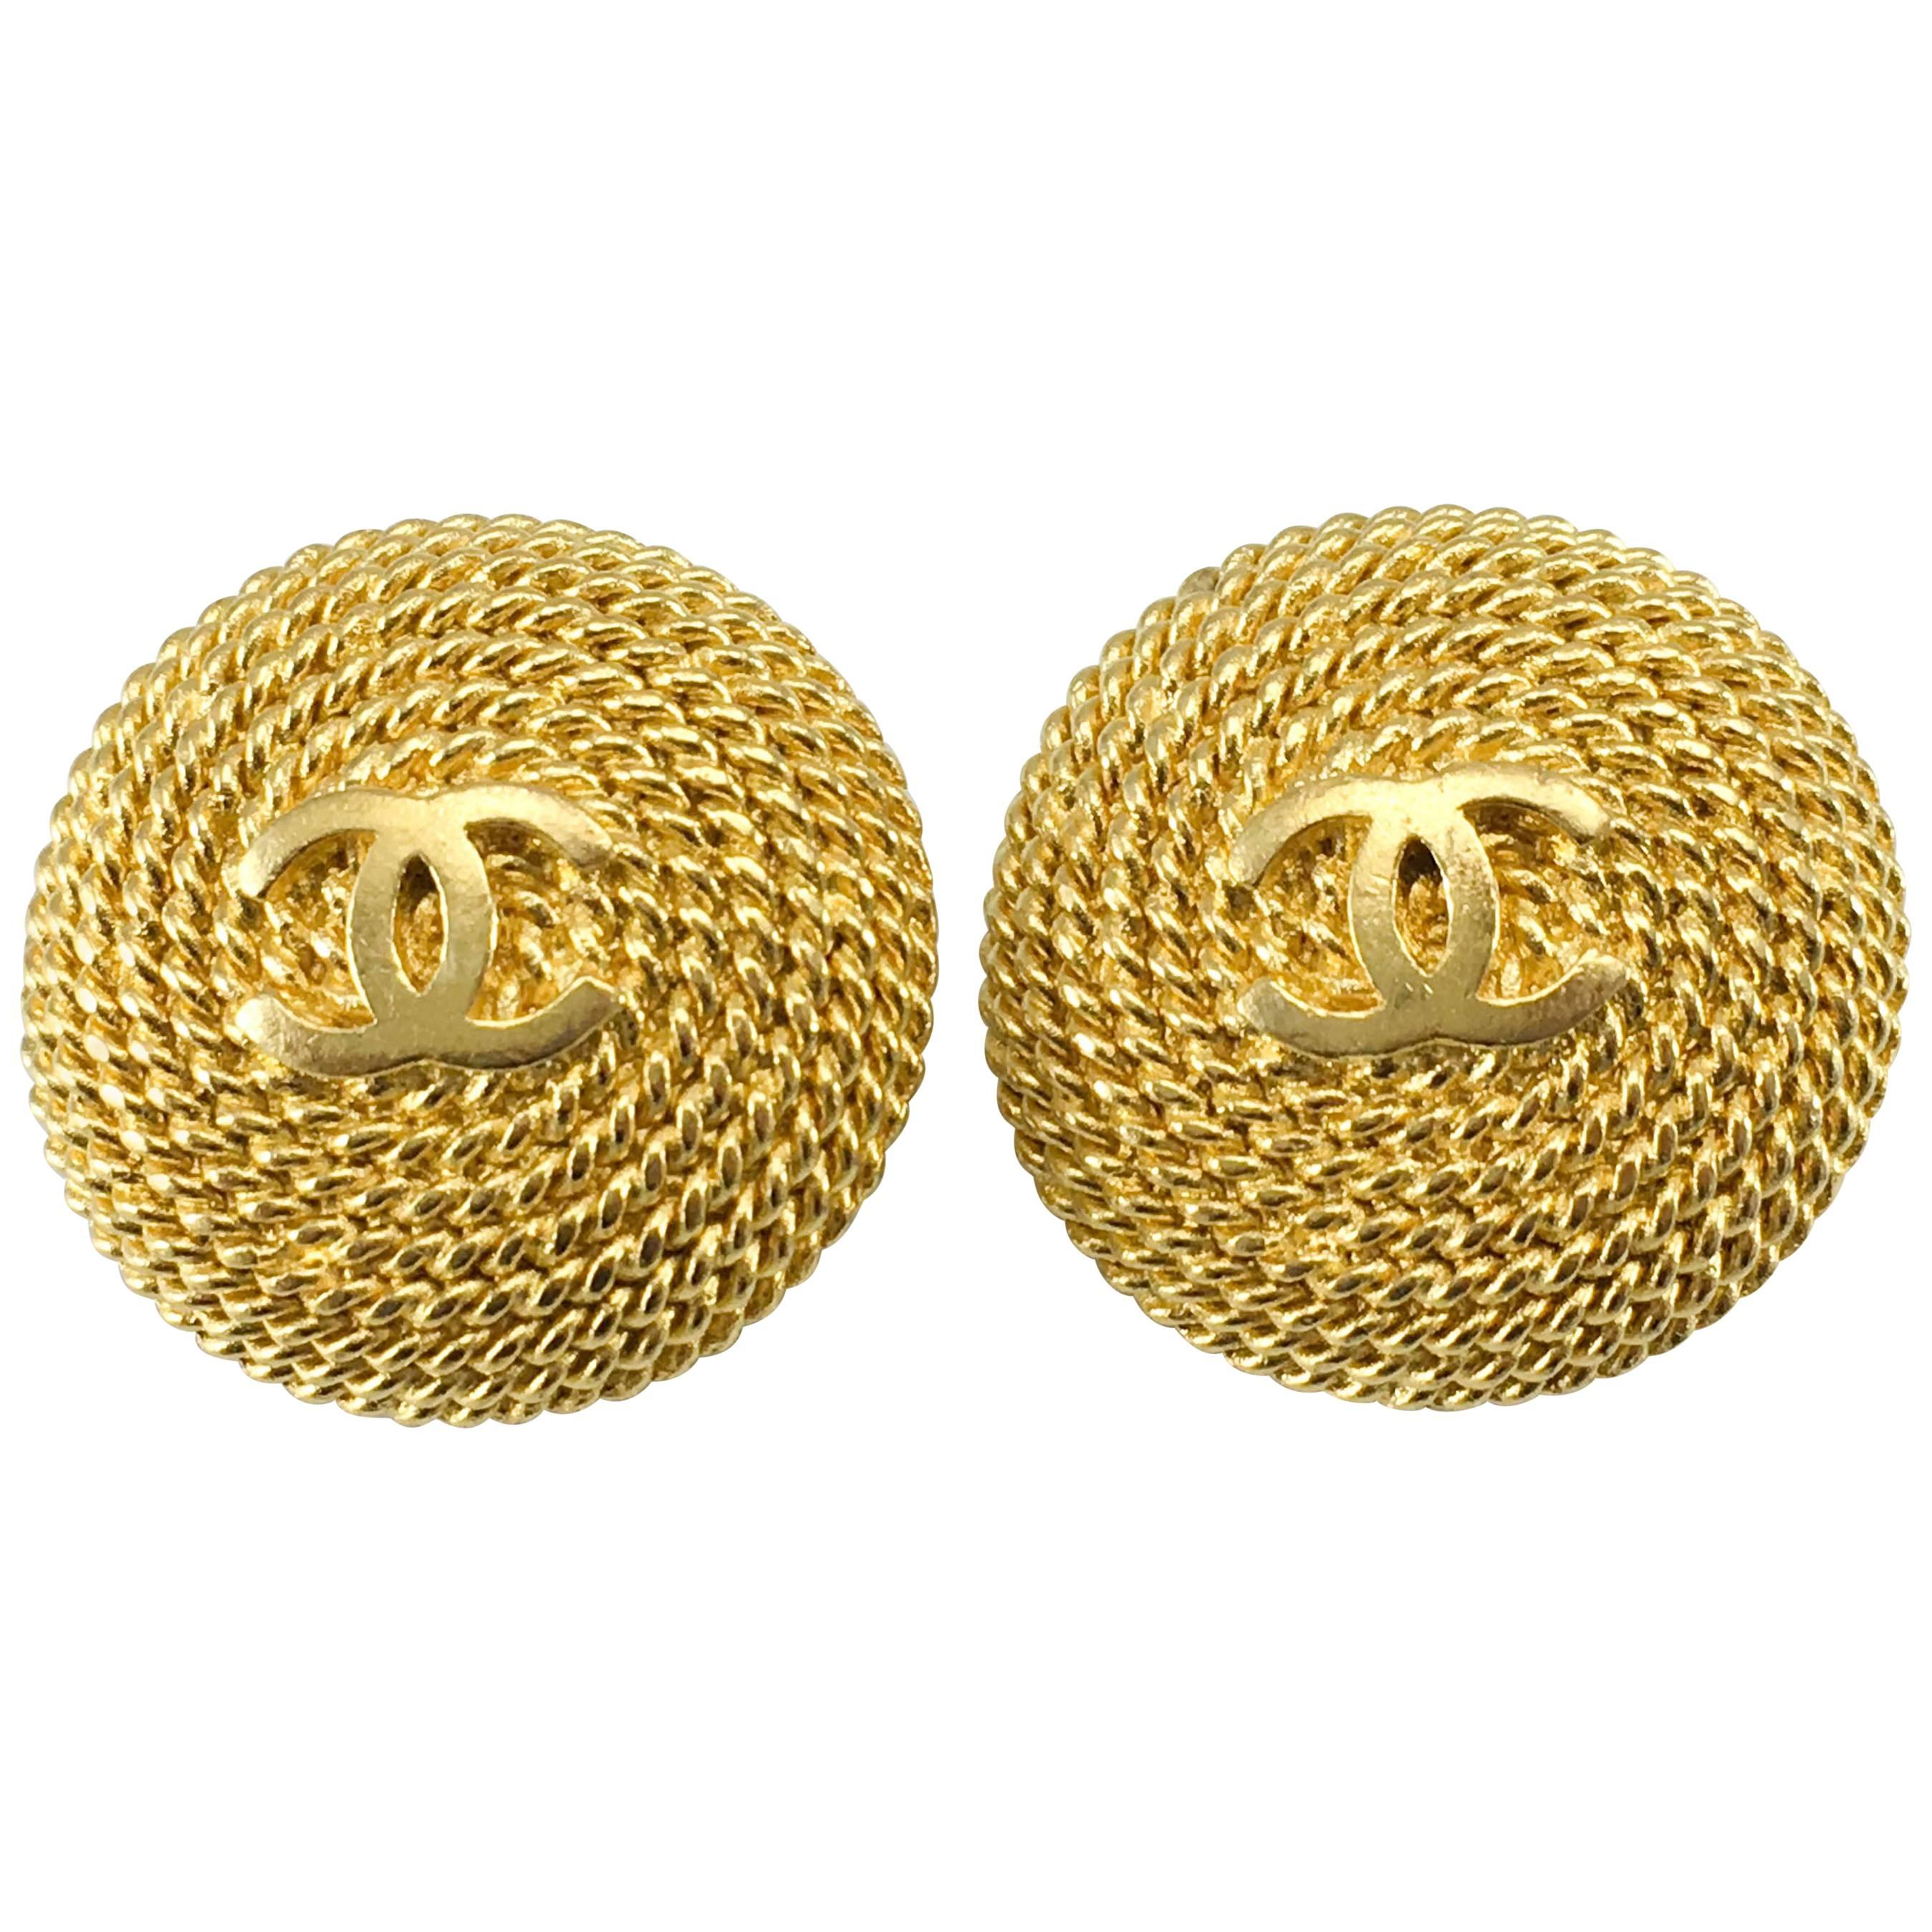 1995 Chanel Gold-Tone Twisted Rope Logo Earrings